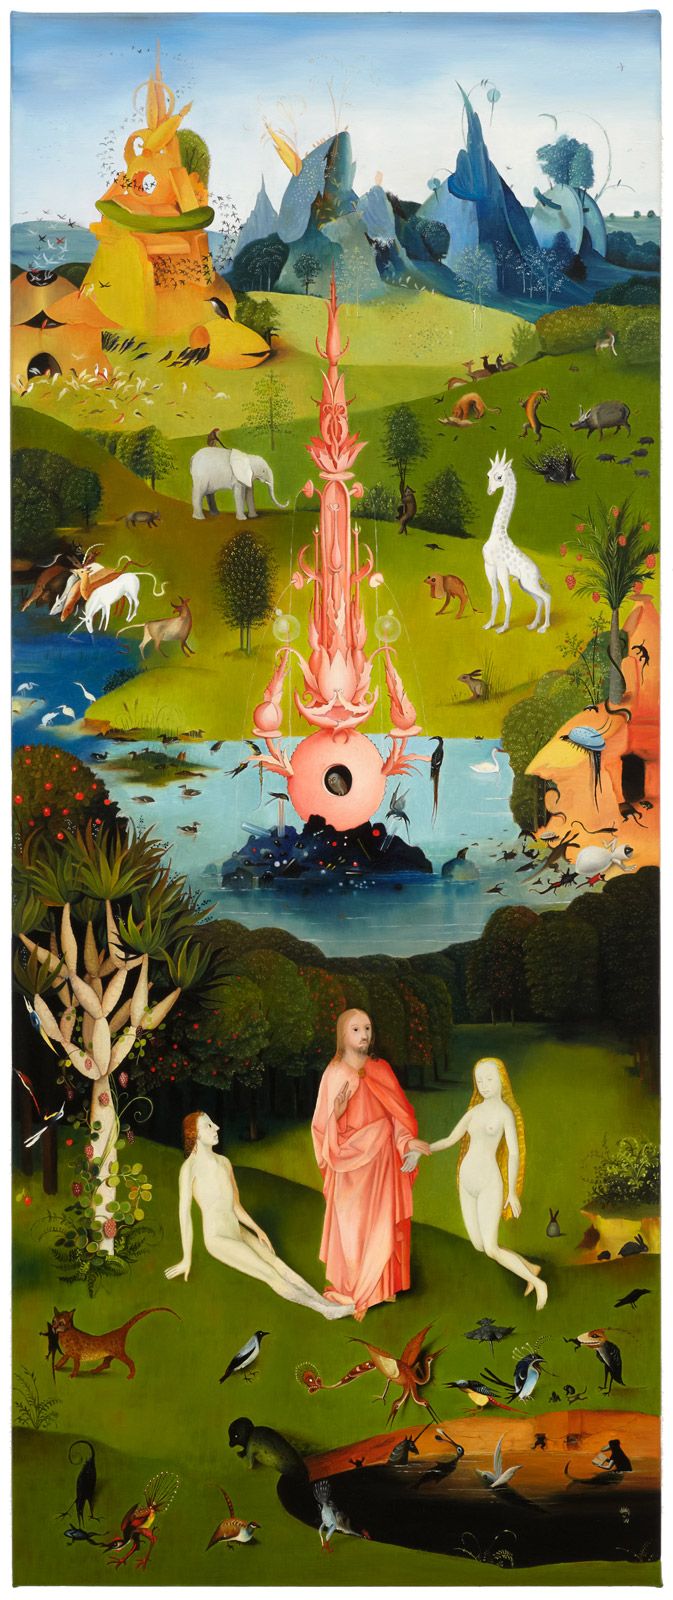 Intricate reimagining of Hieronymus Bosch’s magnum opus, "The Garden of Earthly Delights" (1490-1510) with God and Adam and Eve.